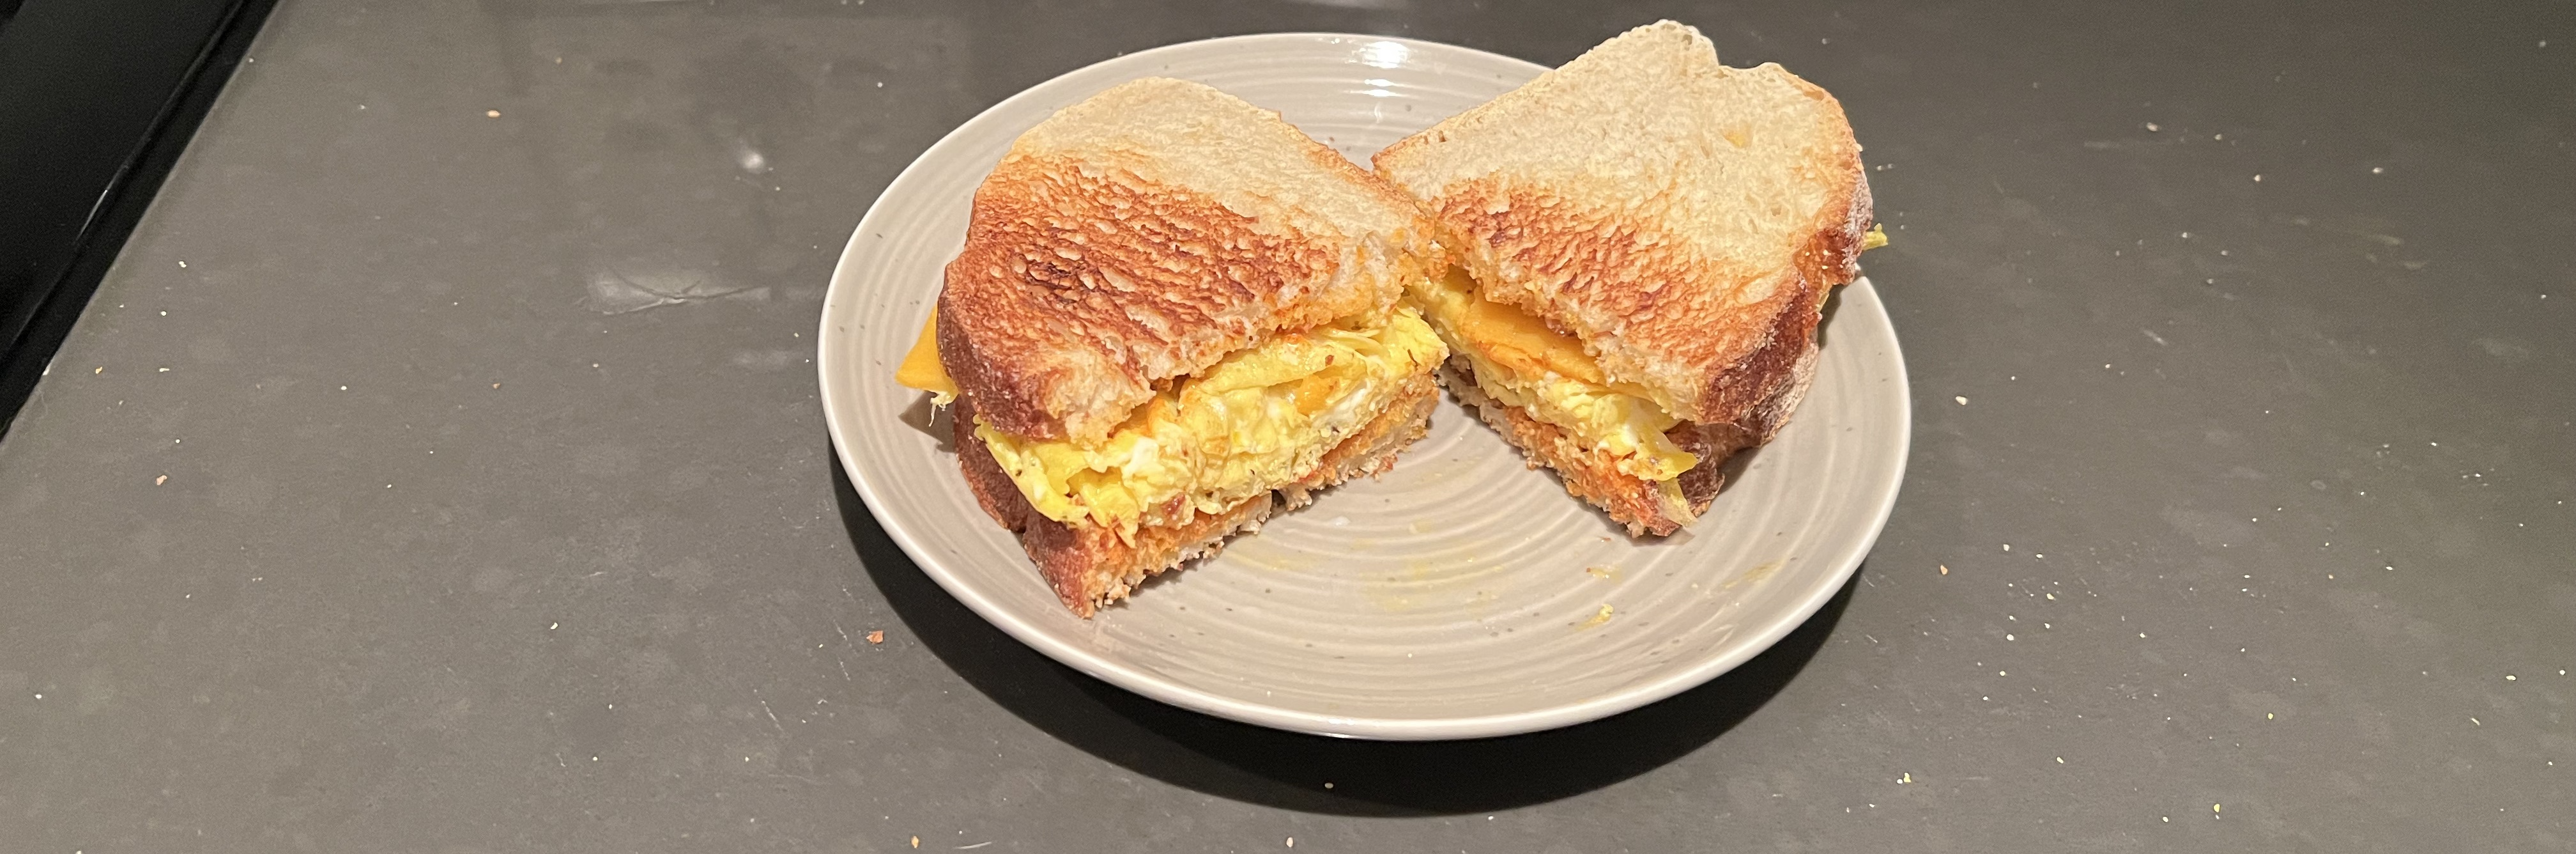 Yet Another Egg Sandwich